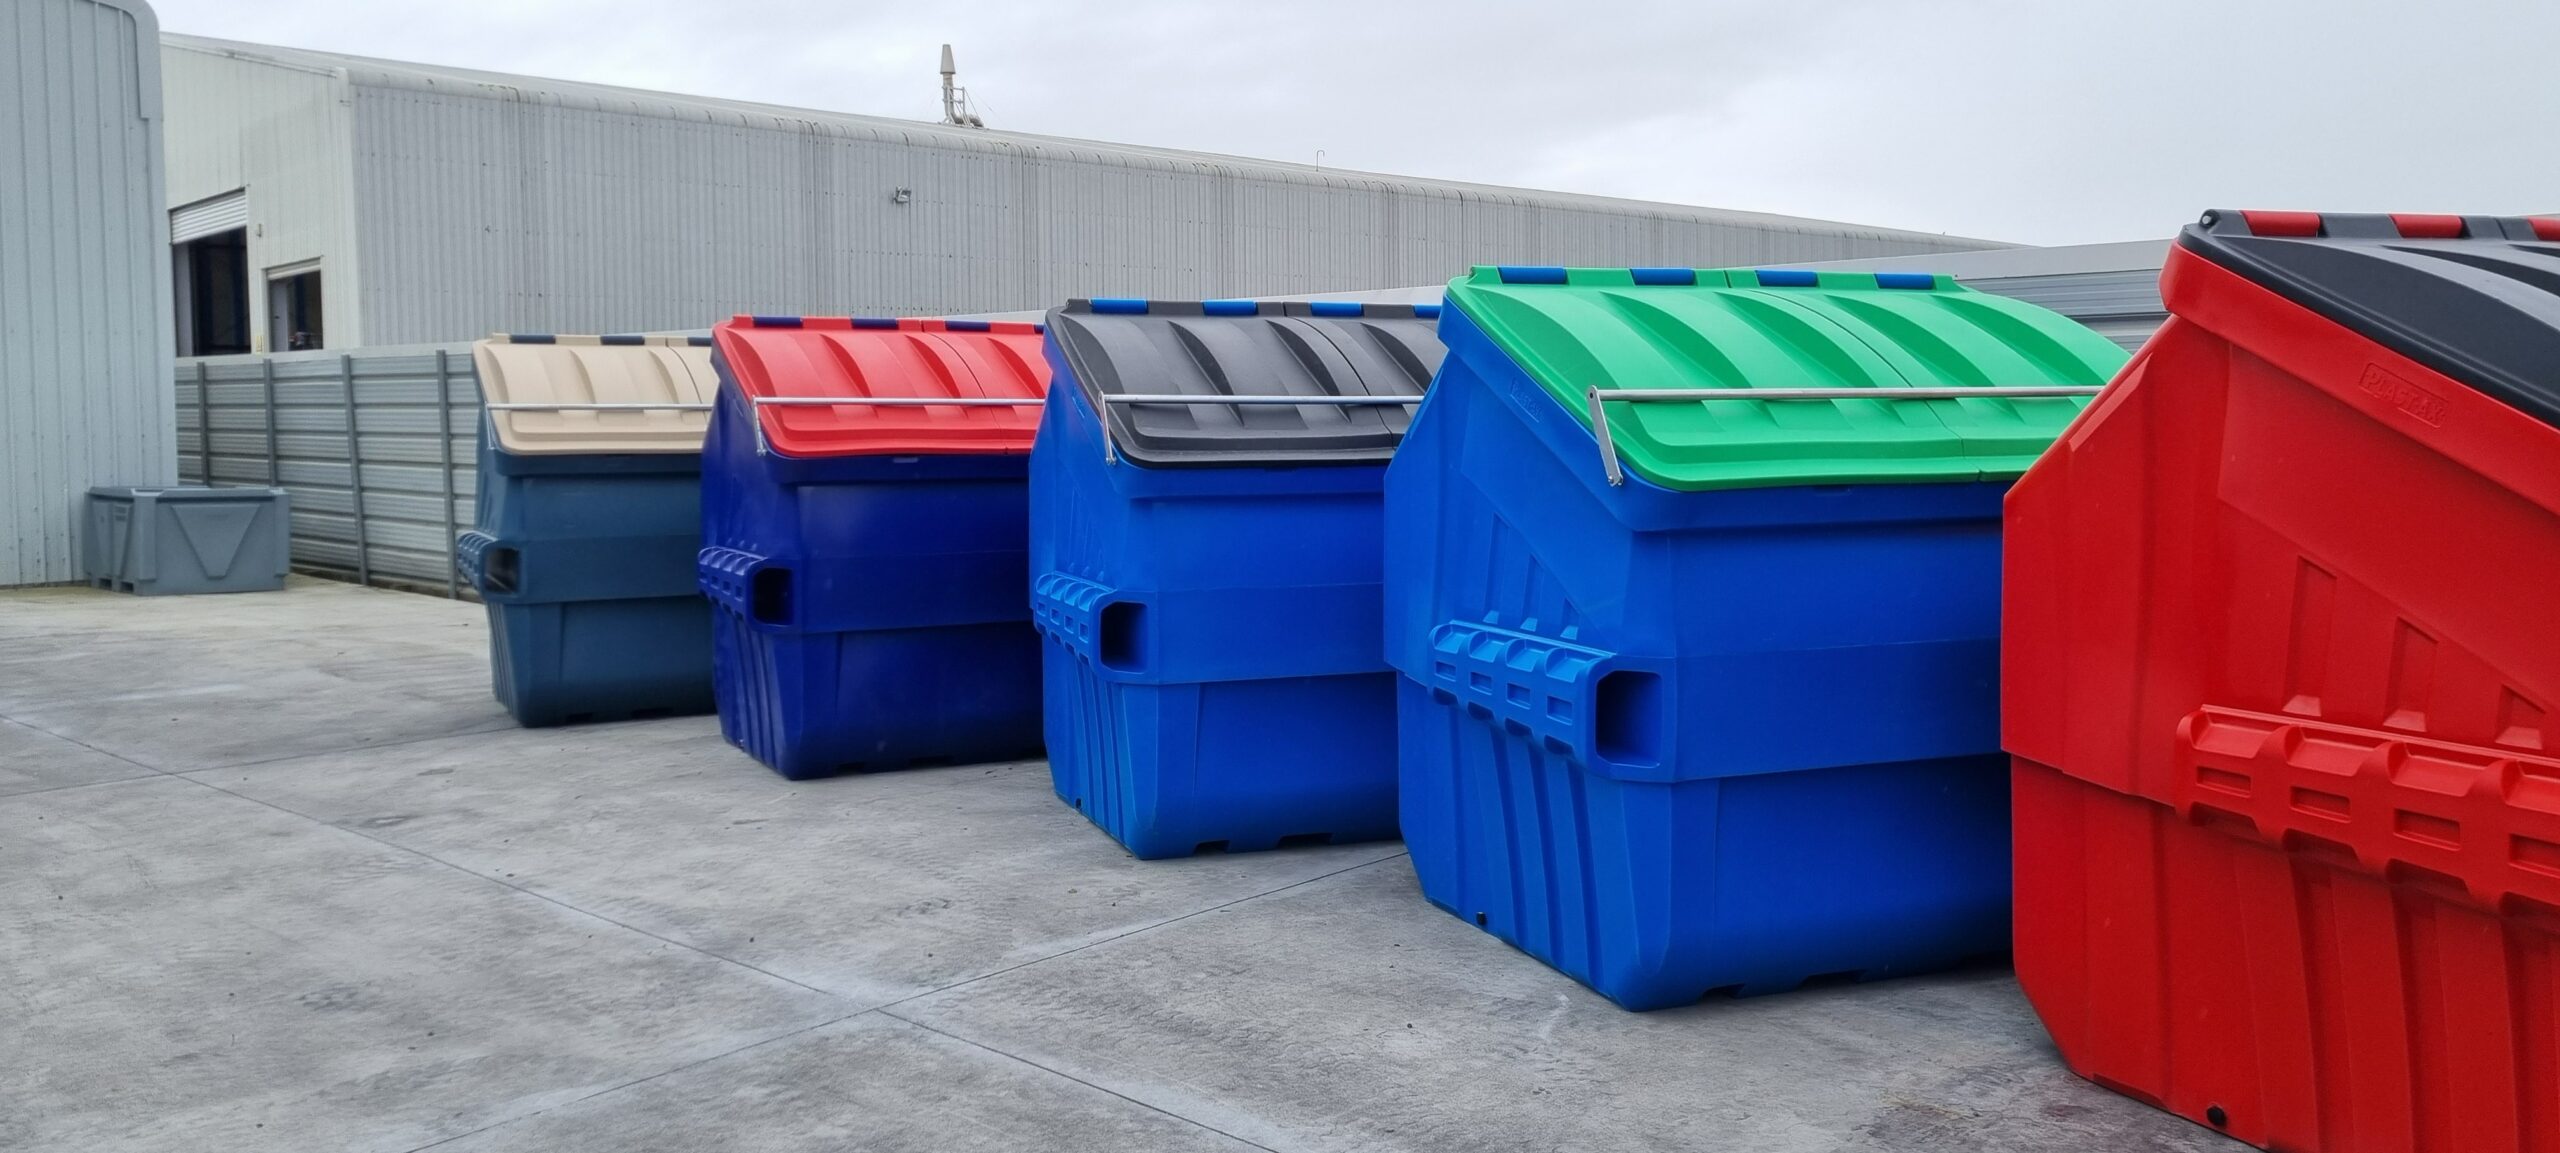 plastic front load bins commercial waste